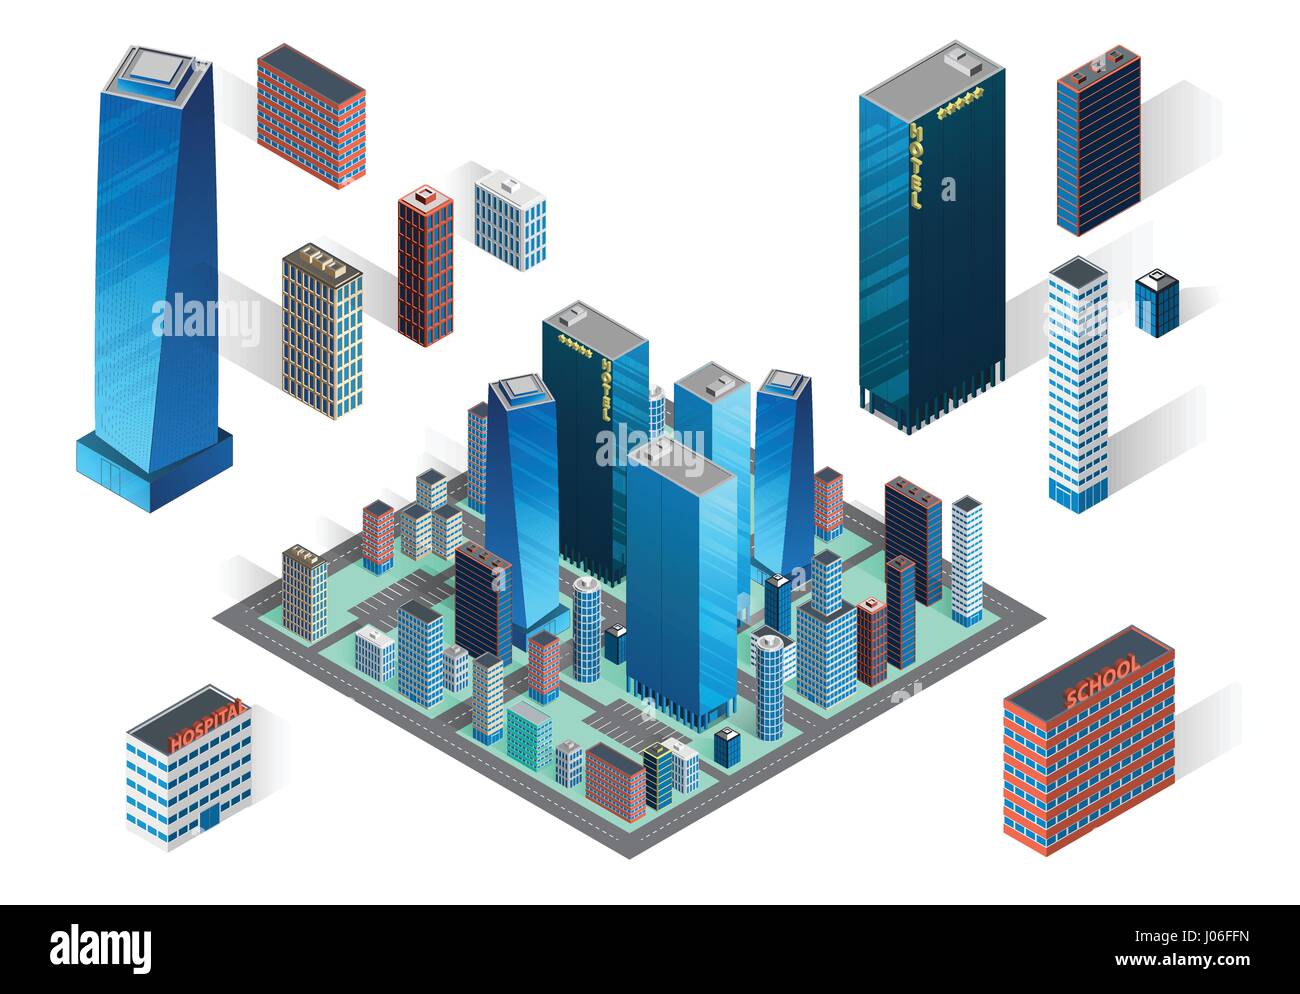 Vector illustration. Modern district. Big city street isometric buildings. Skyscrapers icons on white background. Hotel, business center and houses. Stock Vector